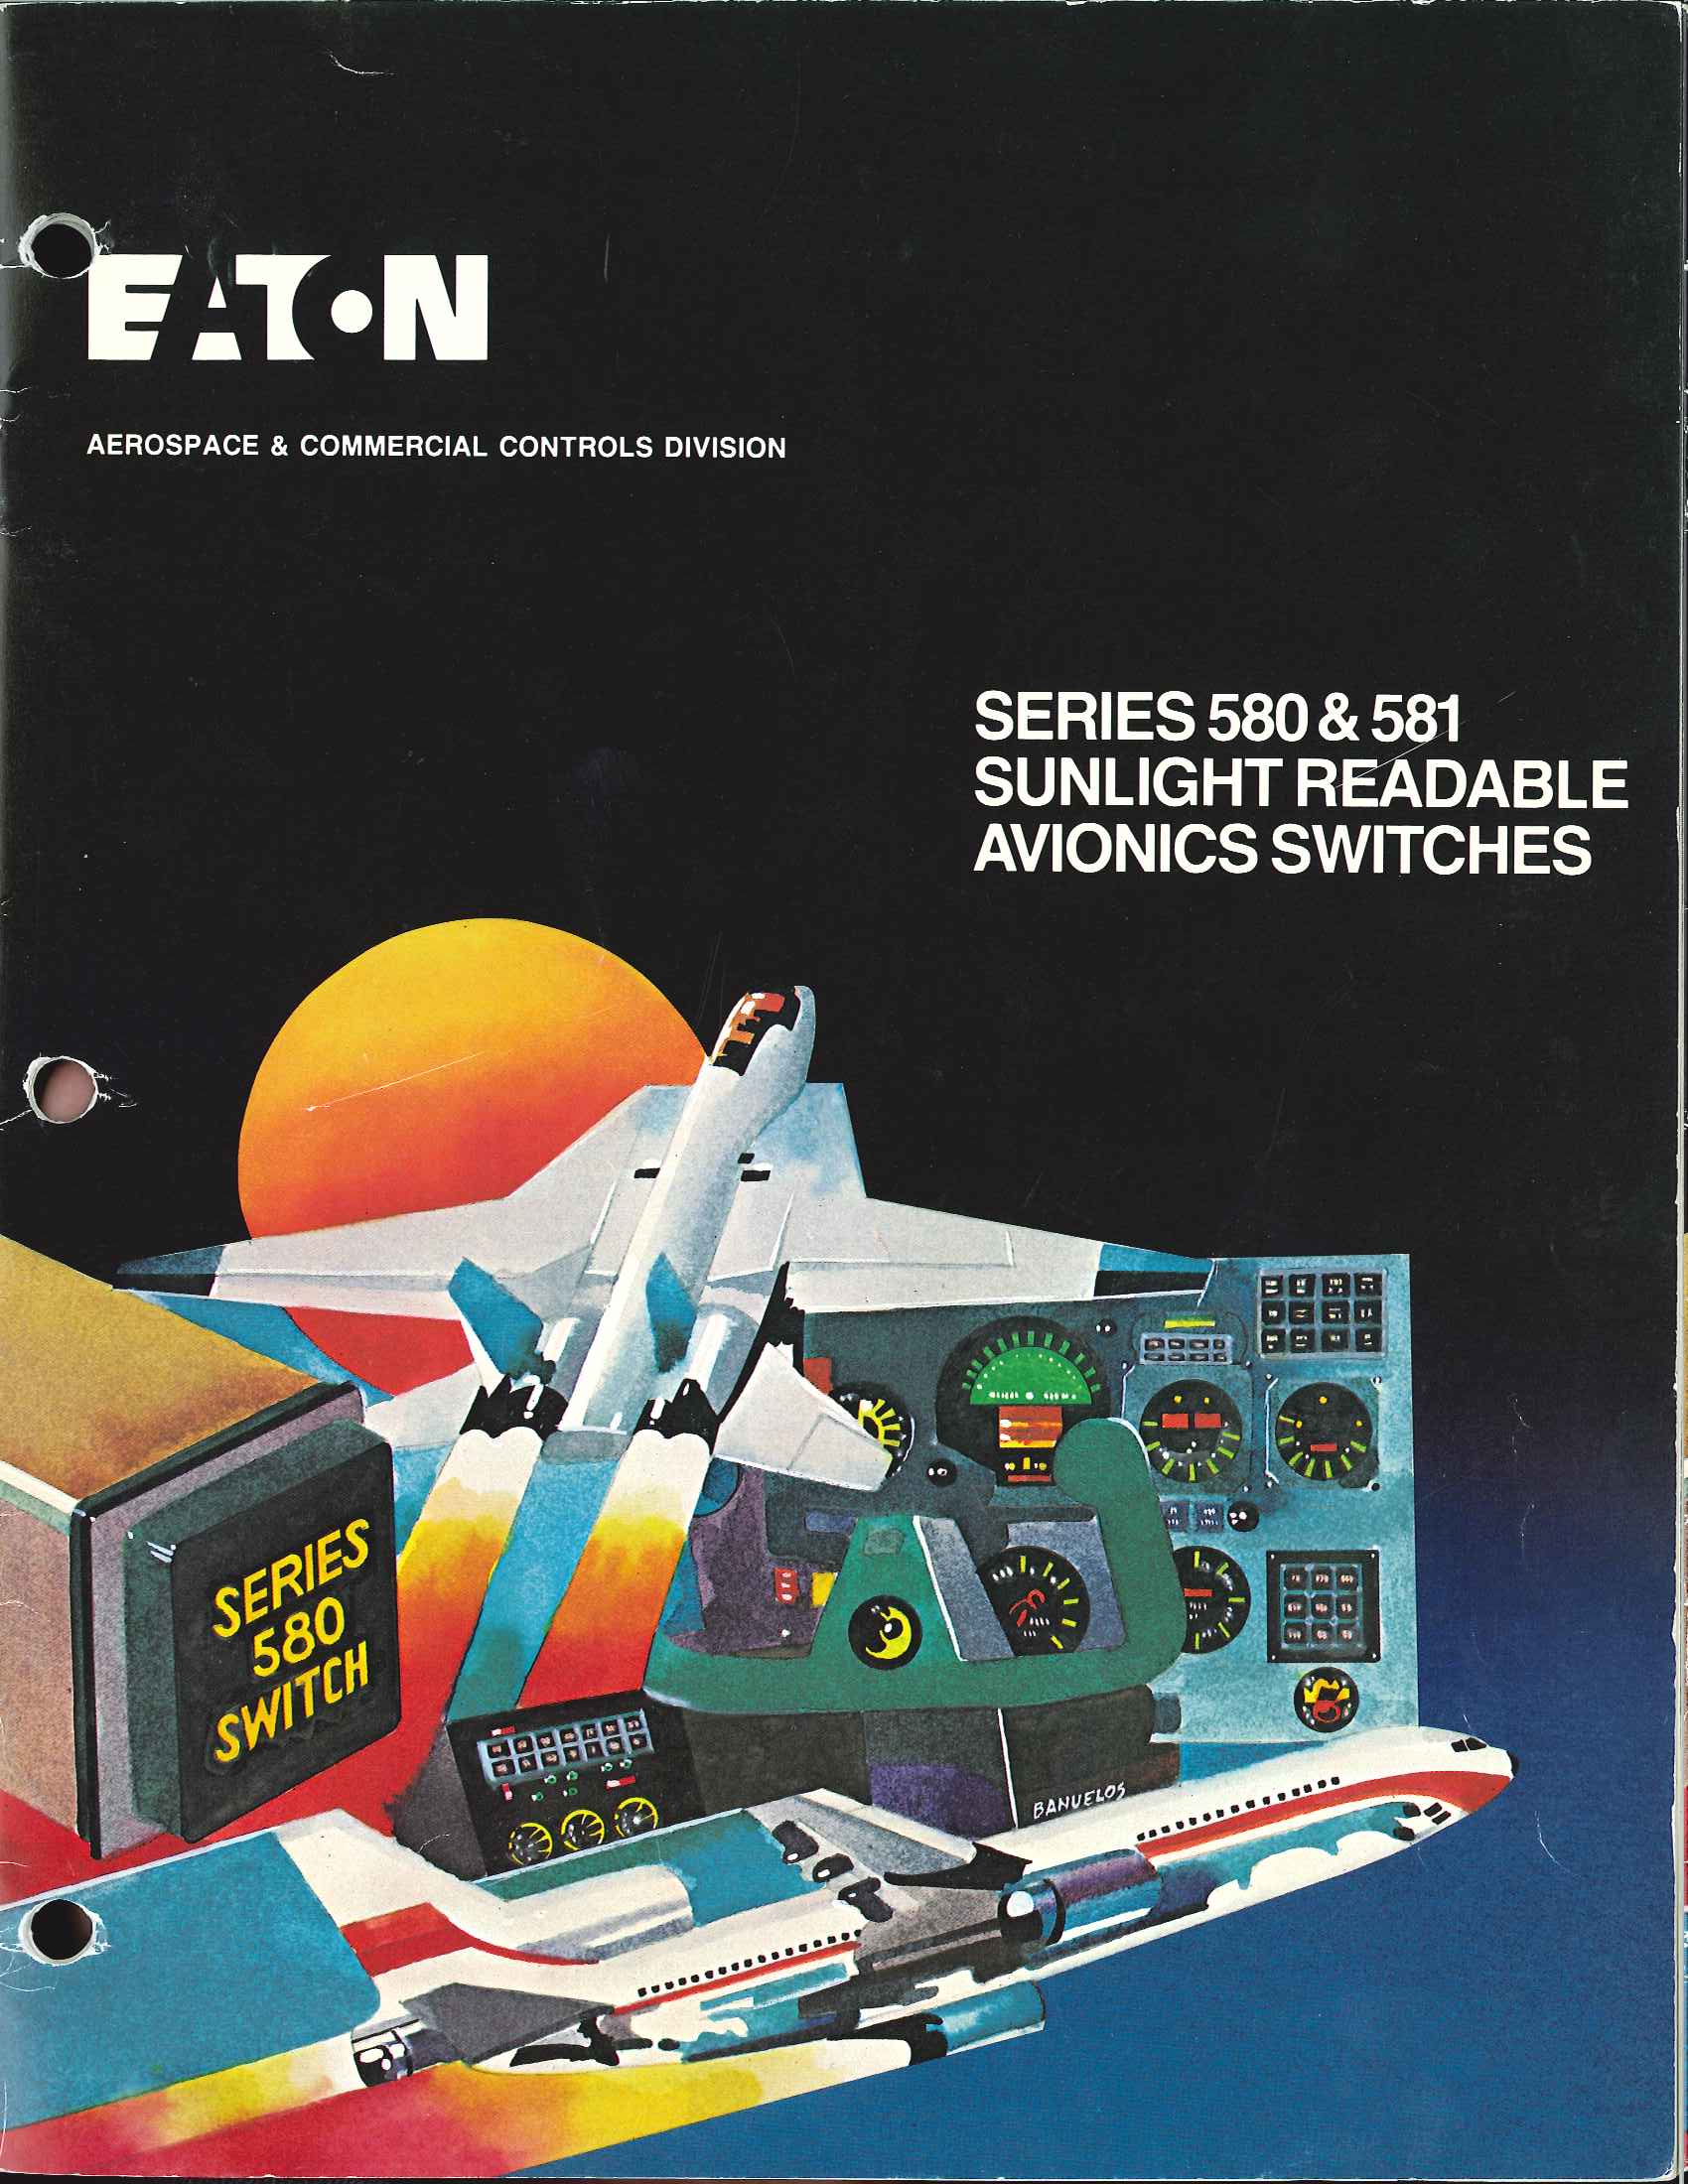 A catalog cover for SUNLIGHT READABLE AVIONICS SWITCHES, which has a really cool set of graphics in the bottom left corner, including the sun, big buttons, an aircraft taking off, and the controls you'd see in an airplane cockpit